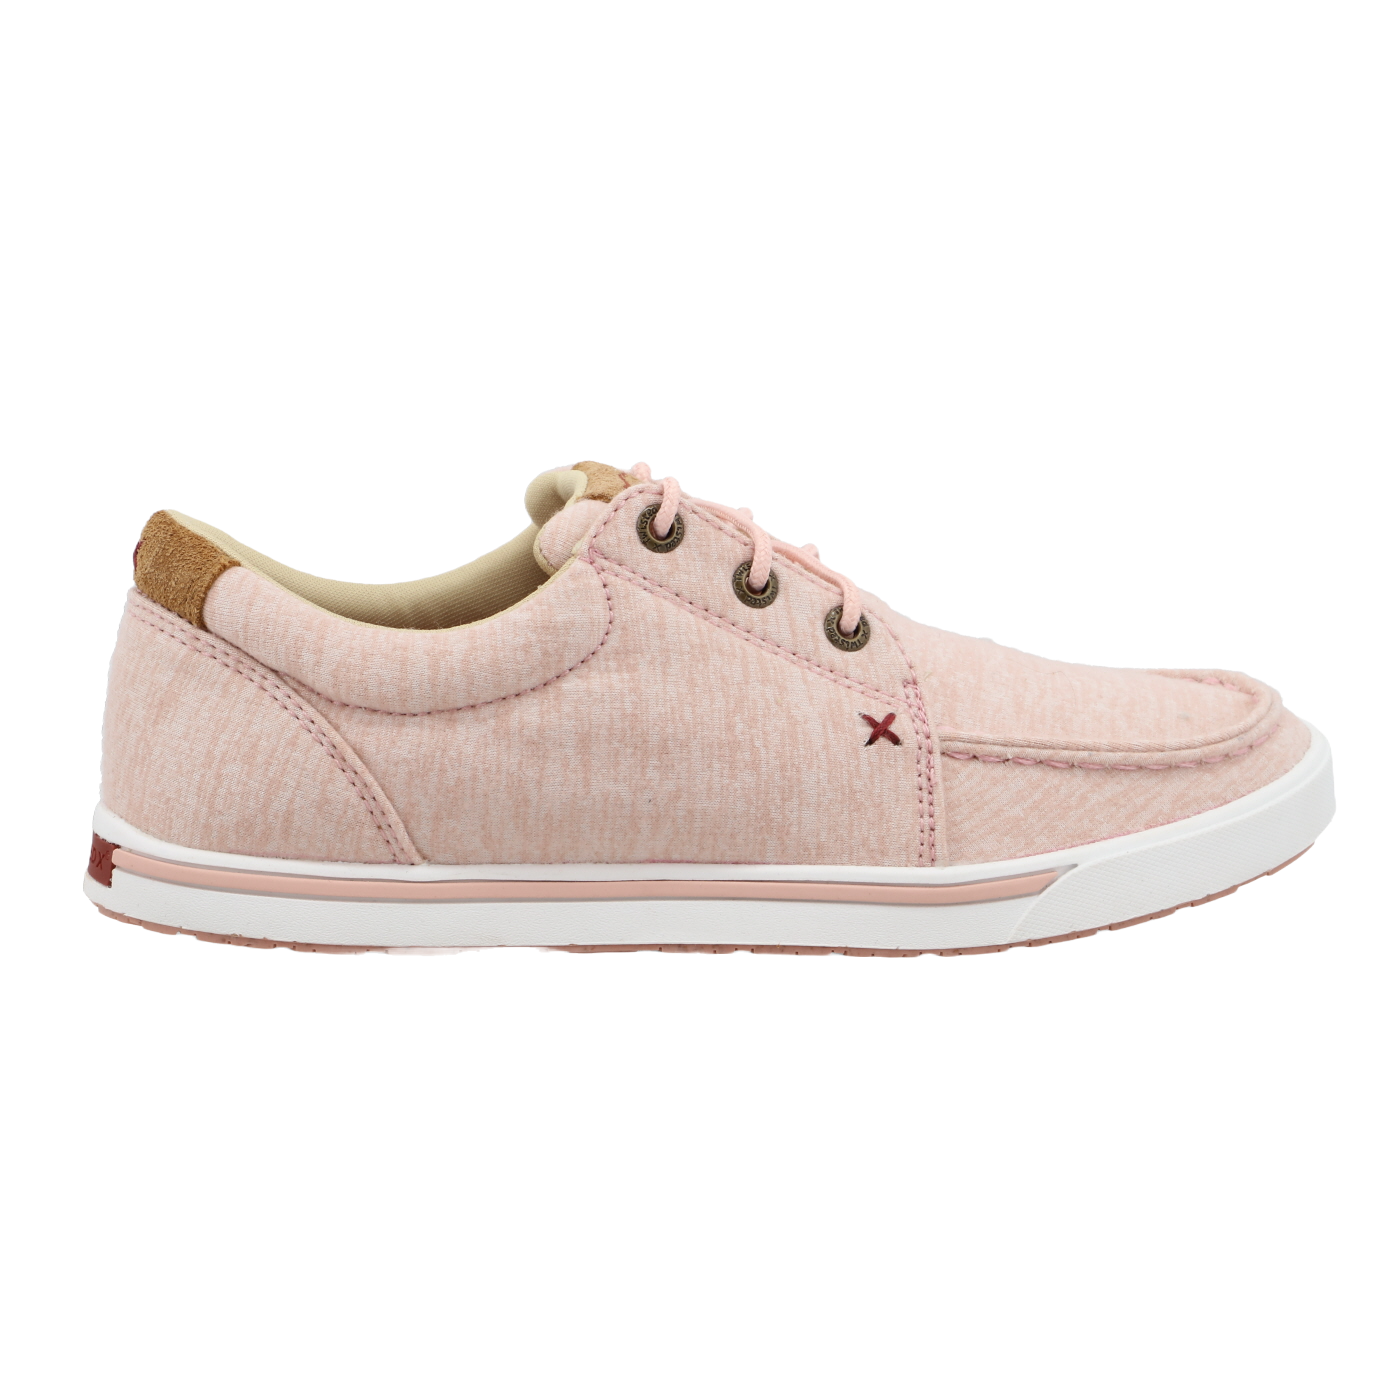 Twisted X® Ladies Moc Toe Baby Pink Slip-On Casual Shoes WCA0053